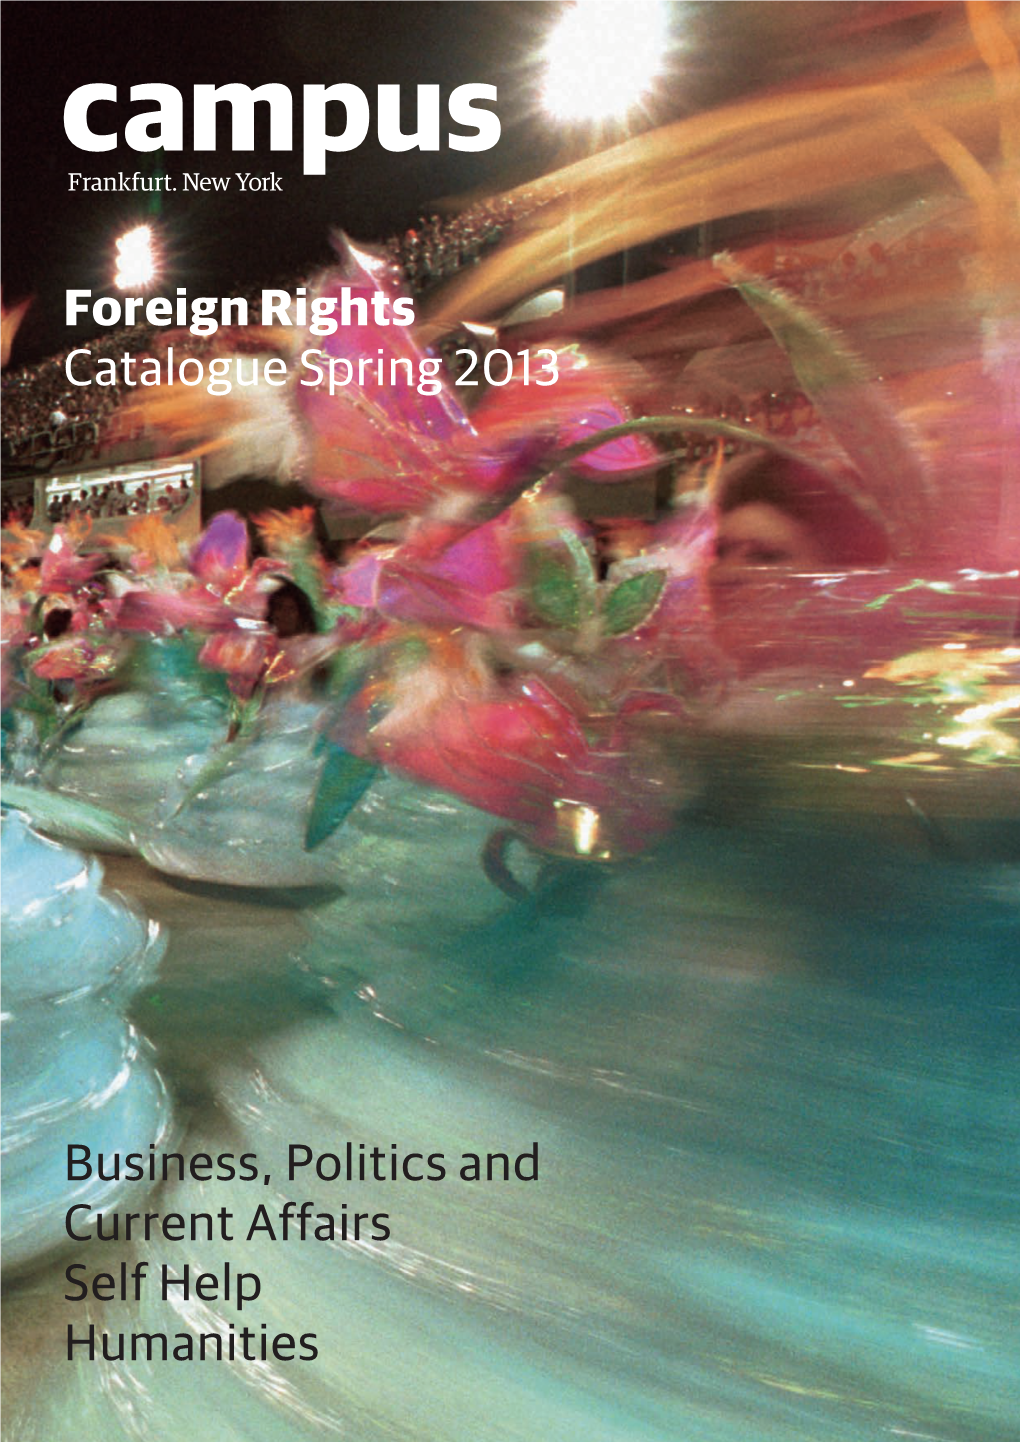 Foreign Rights Catalogue Spring 2013 Business, Politics and Current